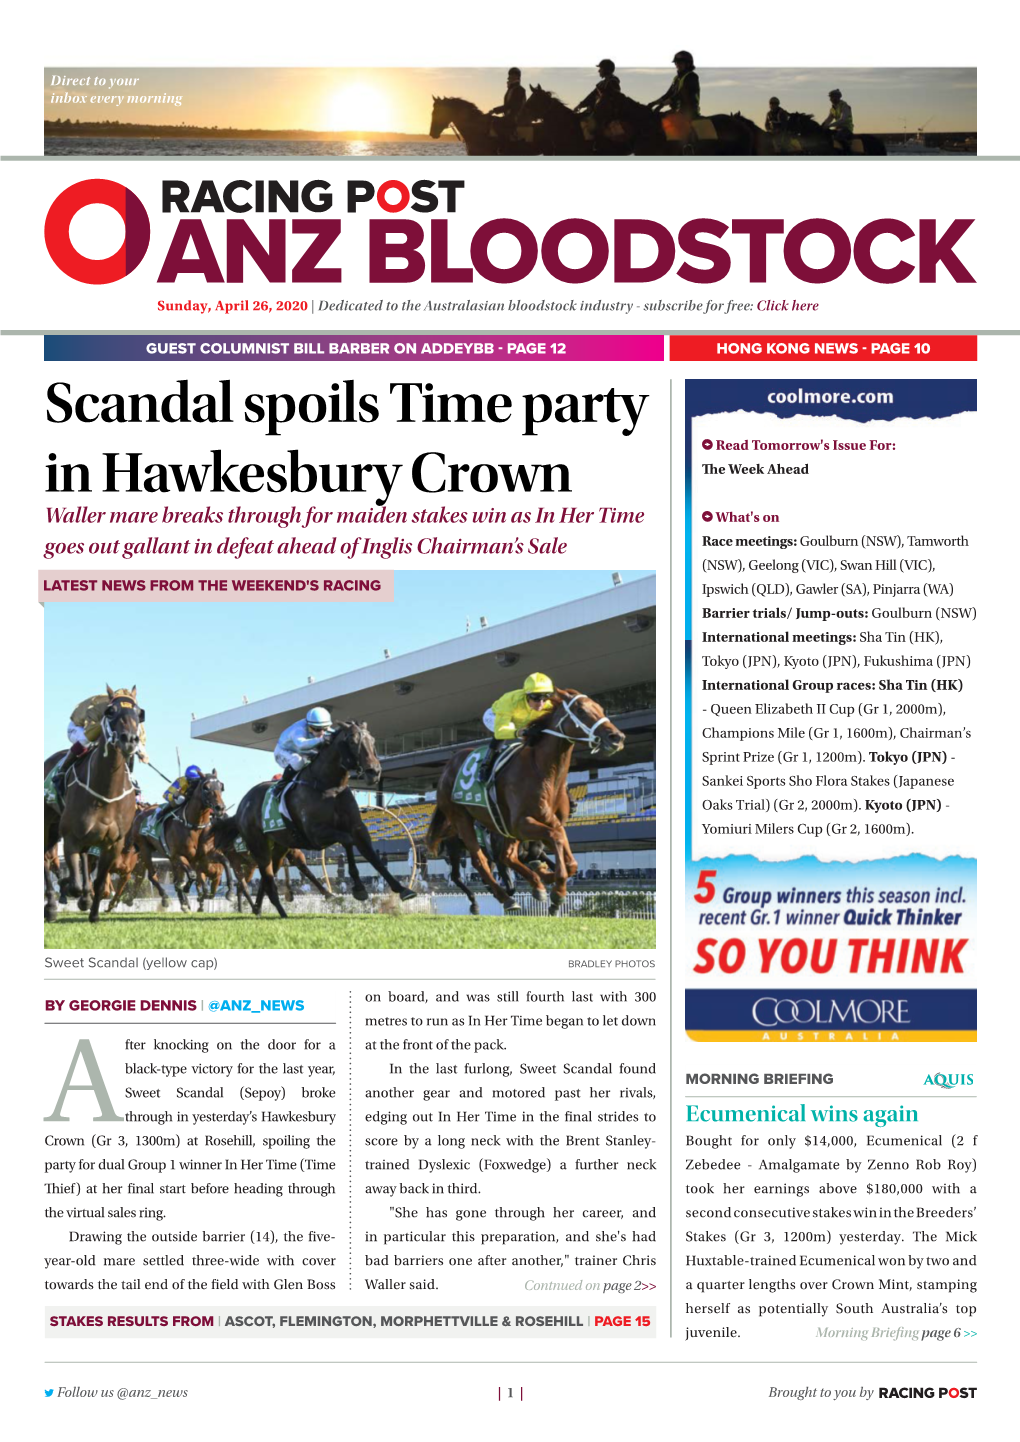 Scandal Spoils Time Party in Hawkesbury Crown | 2 | Sunday, April 26, 2020